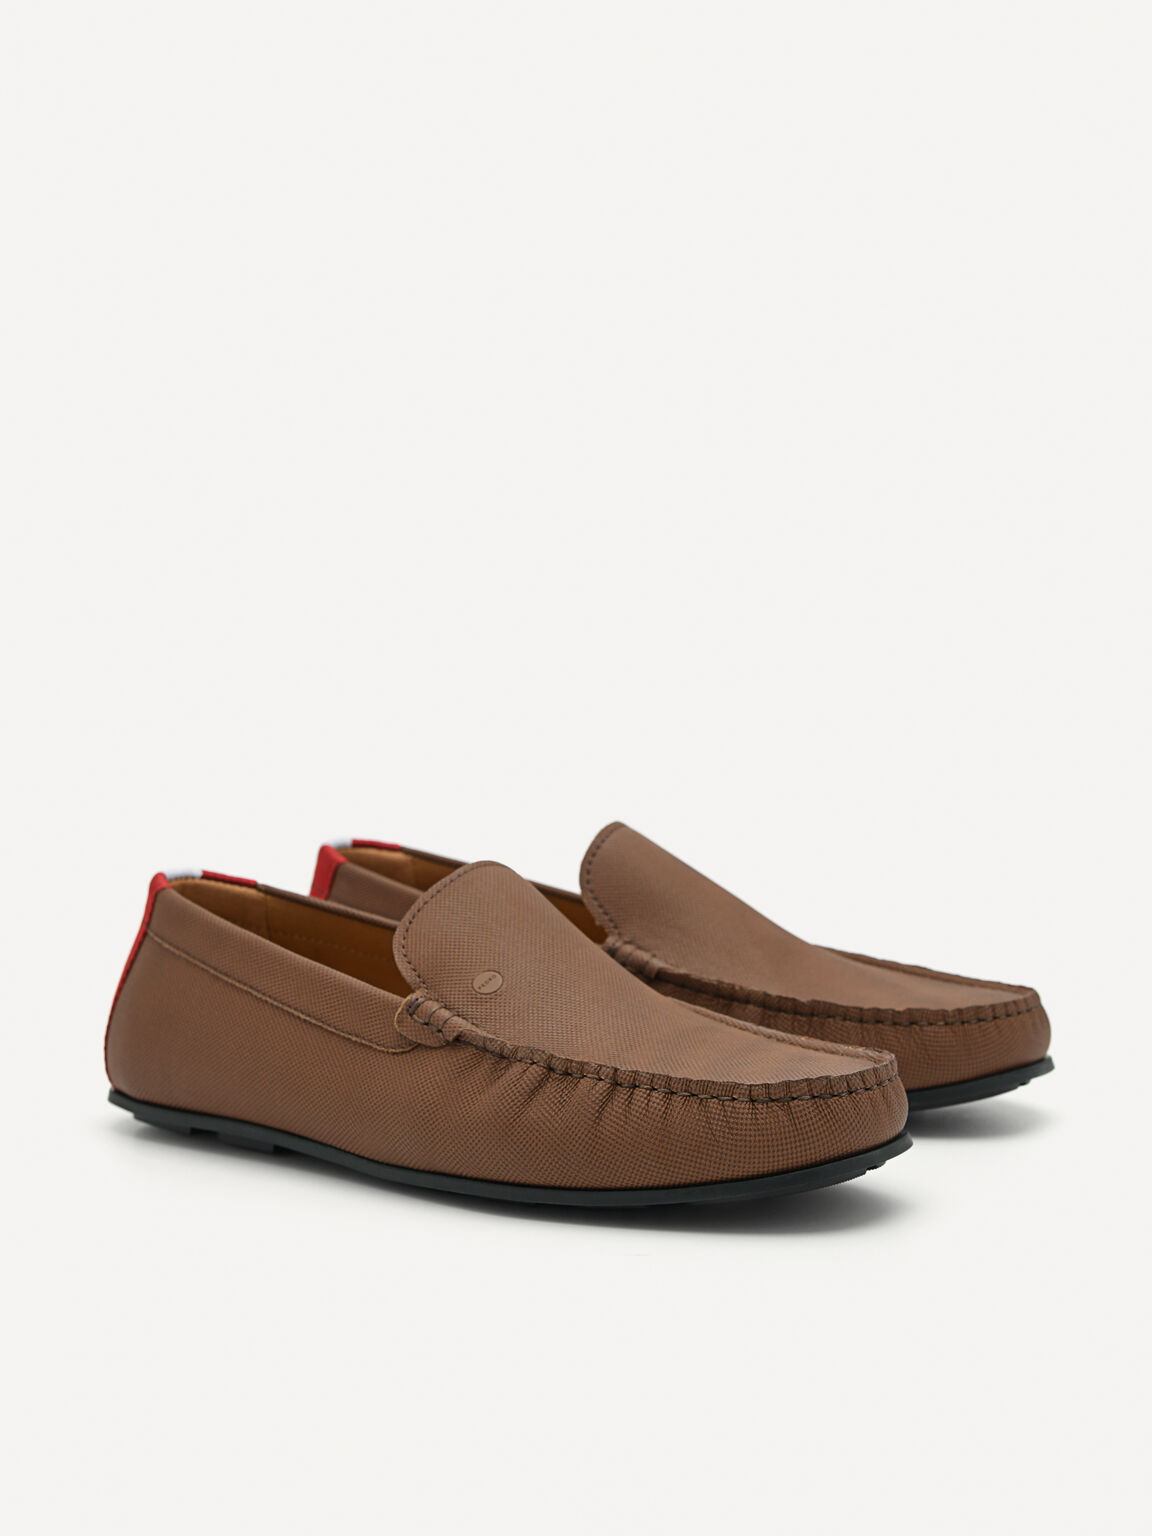 Leather & Fabric Slip-On Loafers, Brown